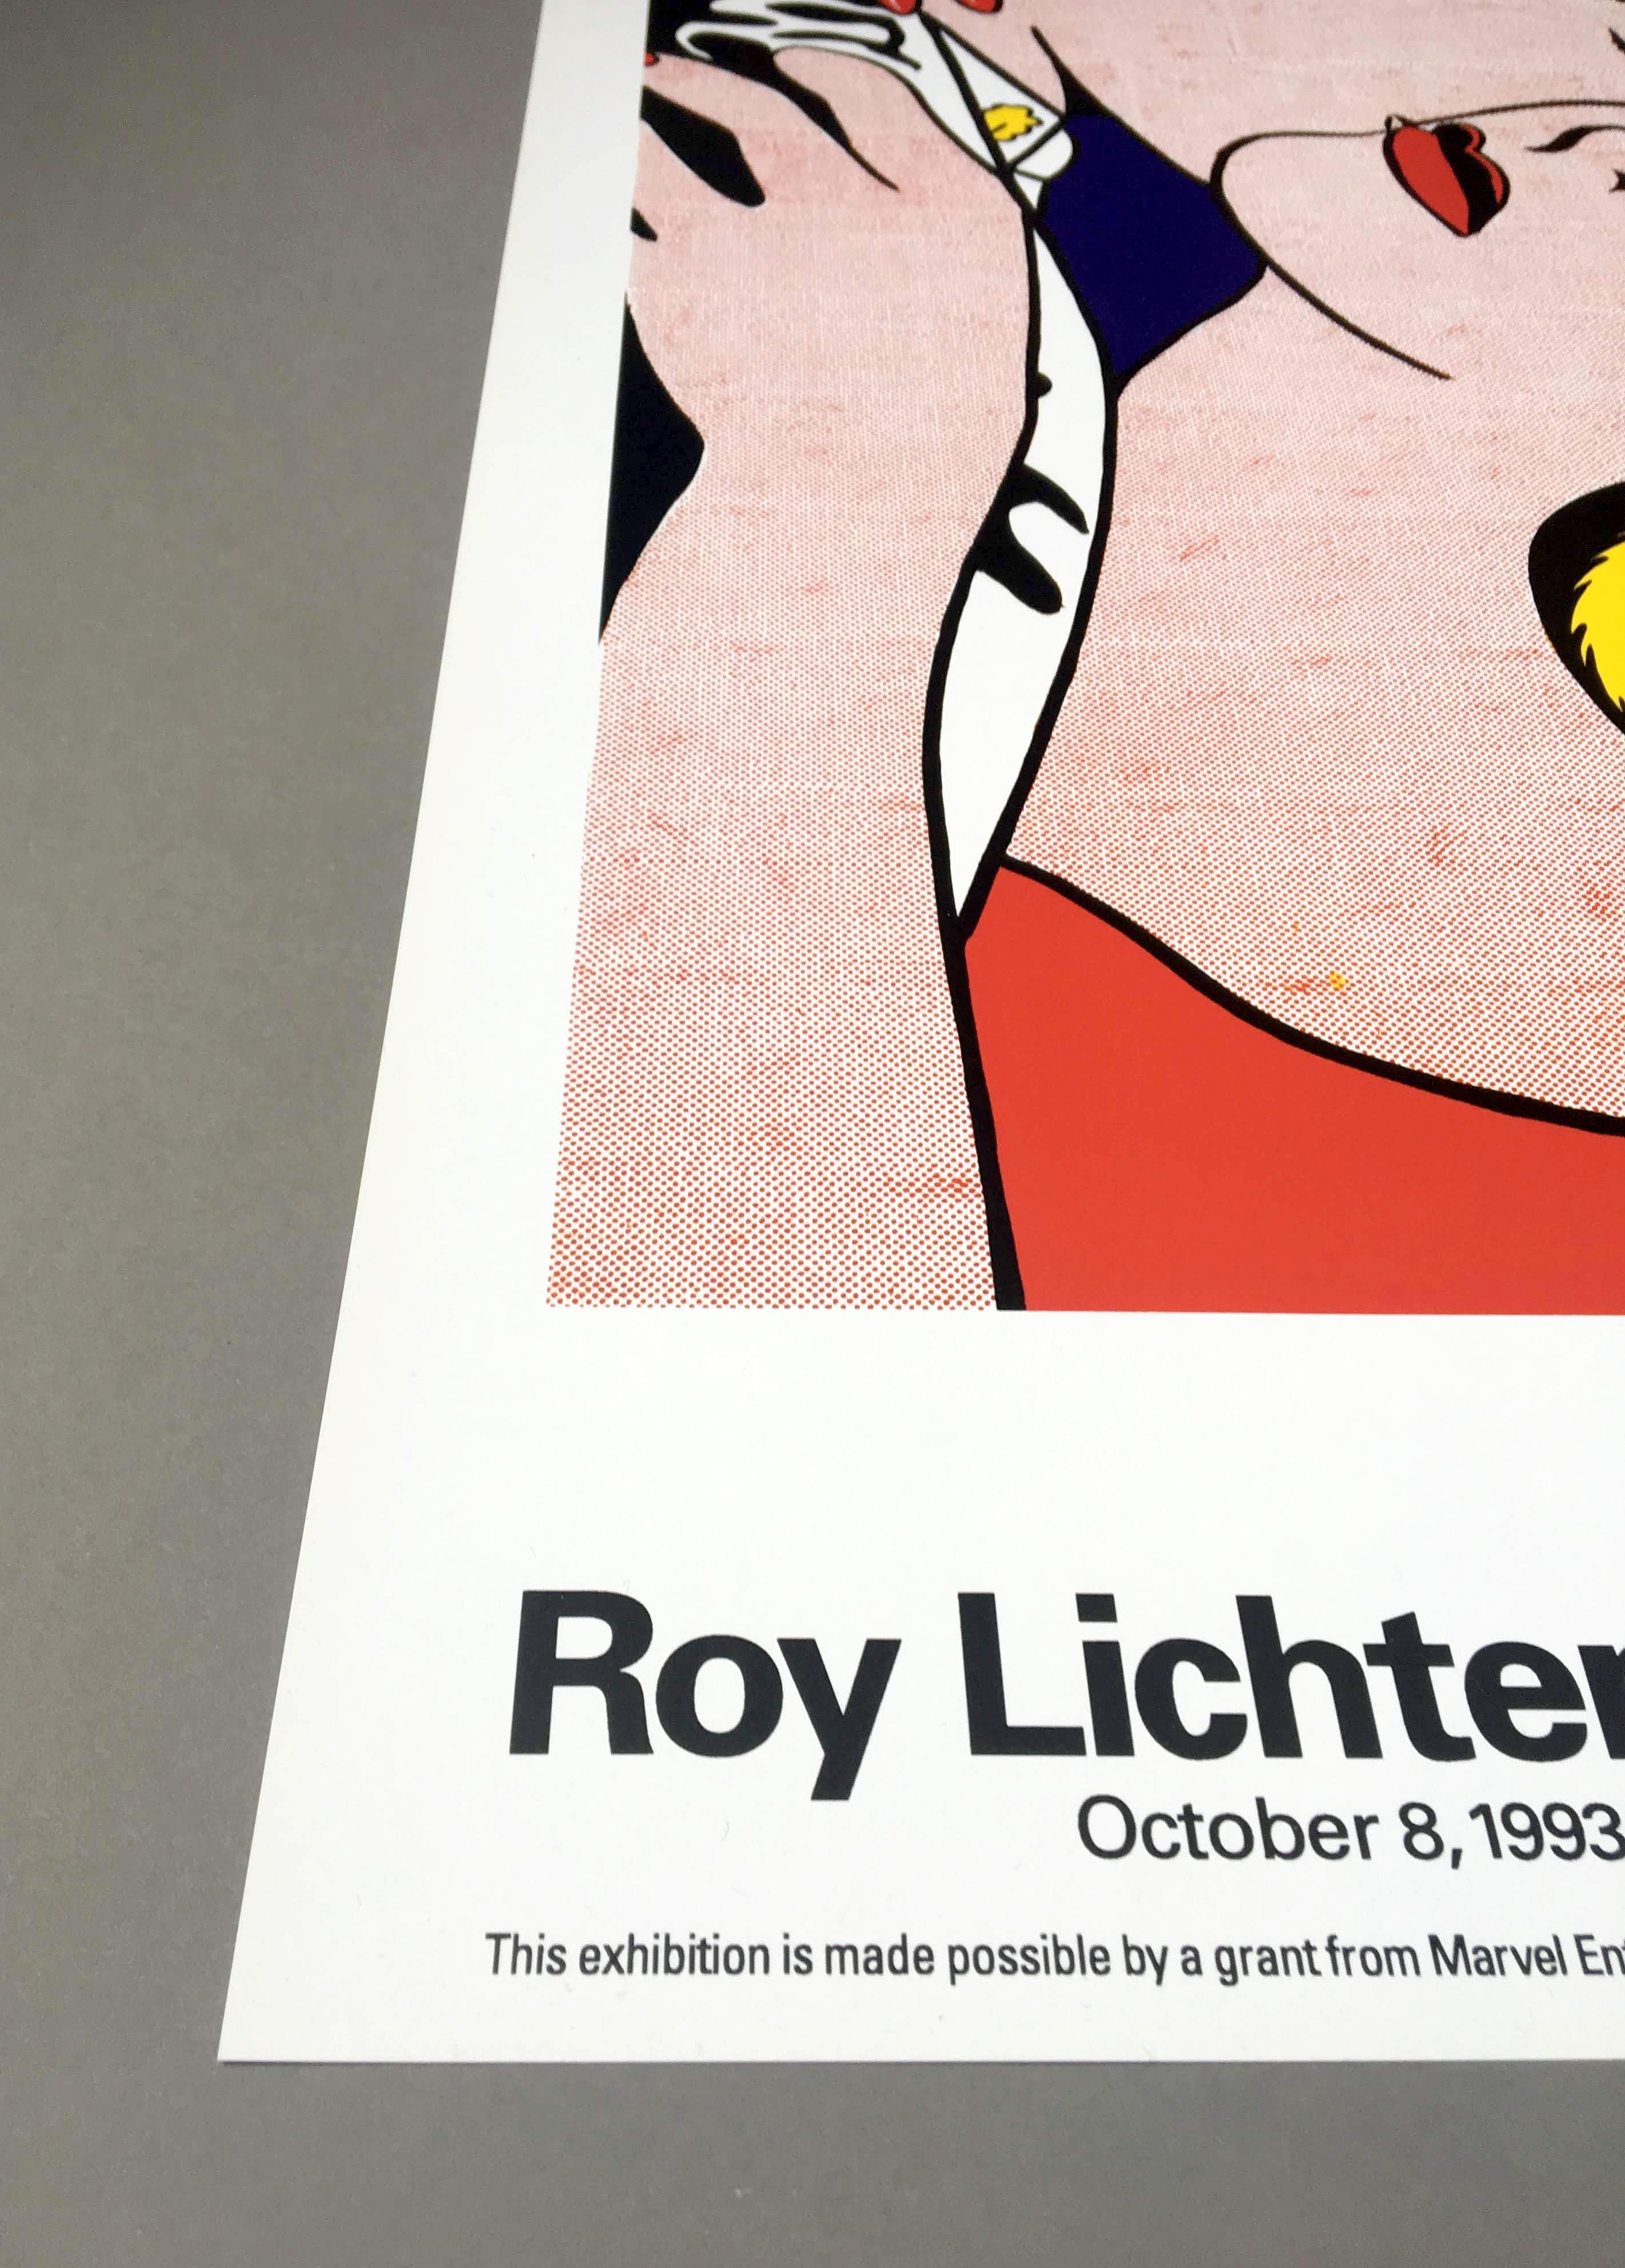 American Roy Lichtenstein 'The Kiss' Rare Original 1993 Poster Print on Wove Paper For Sale